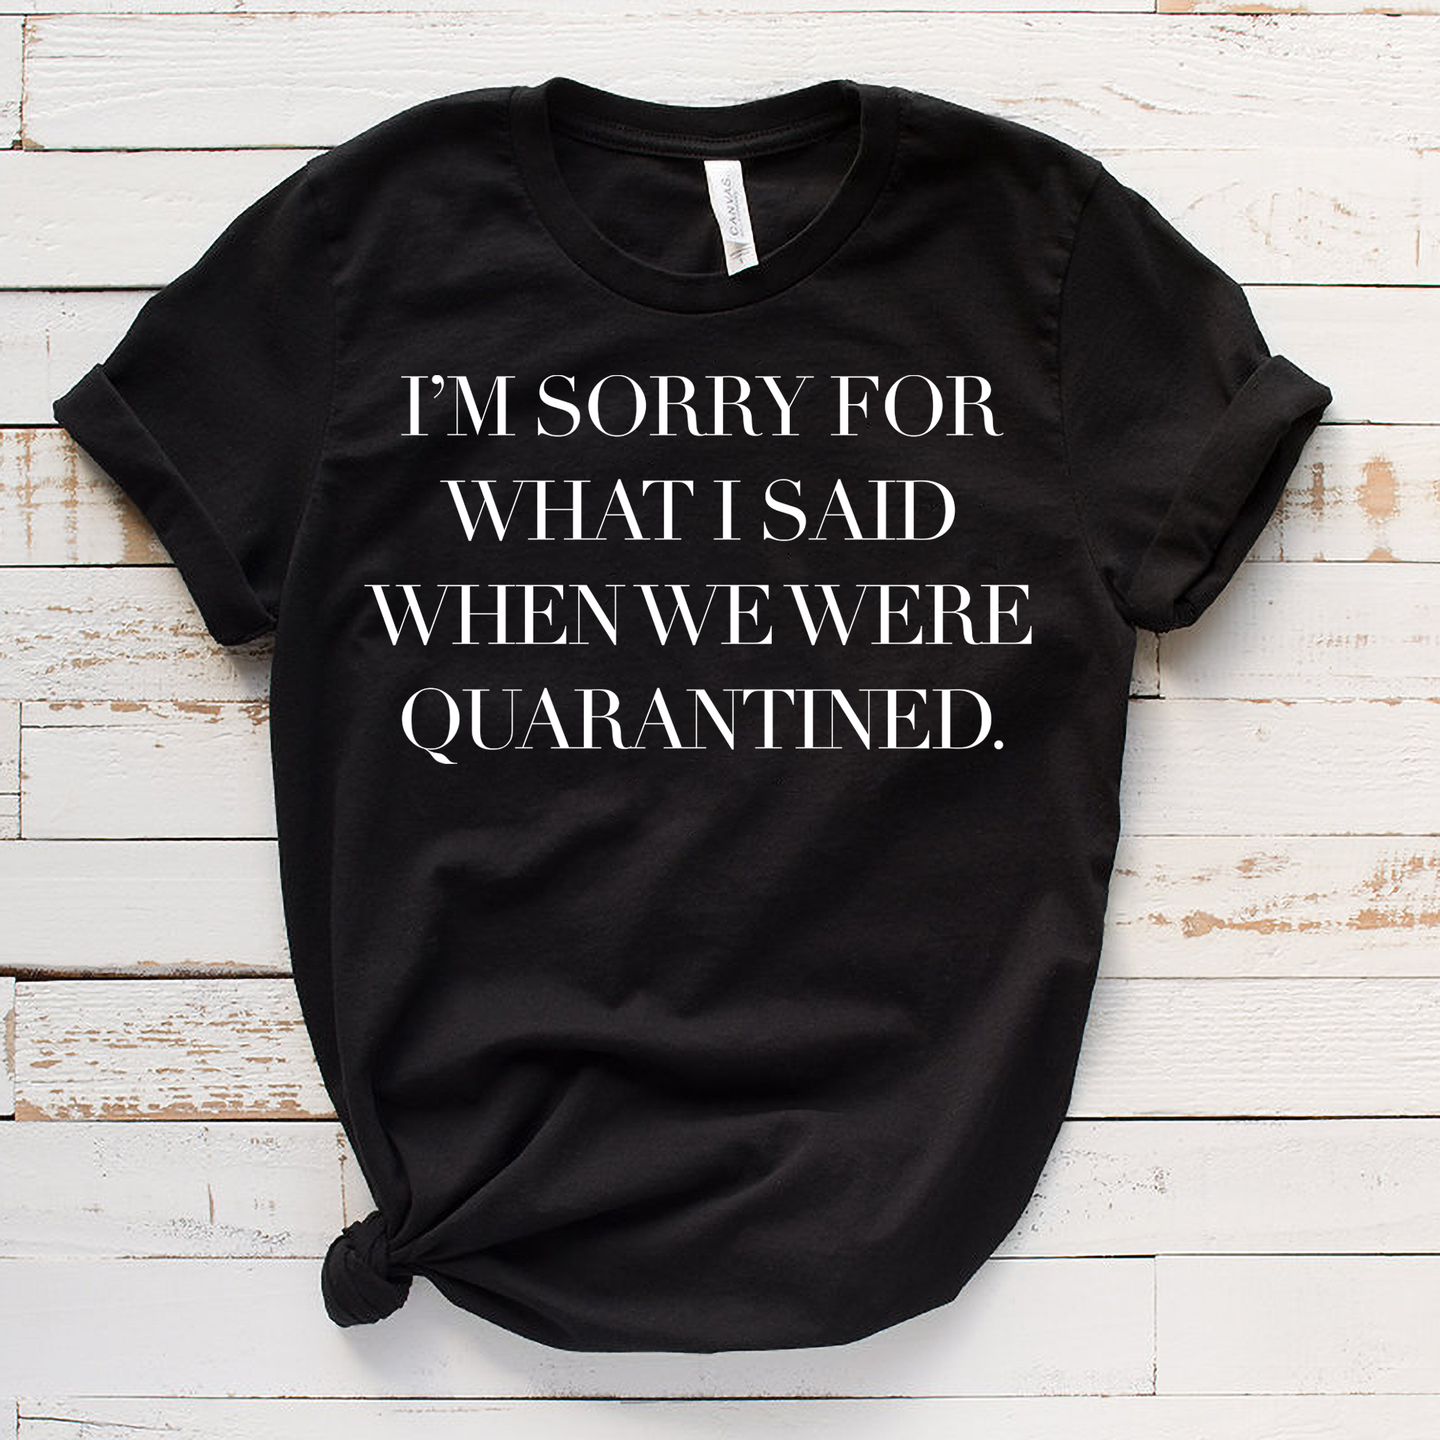 I'm Sorry For What I Said When We Were Quarantined Shirt